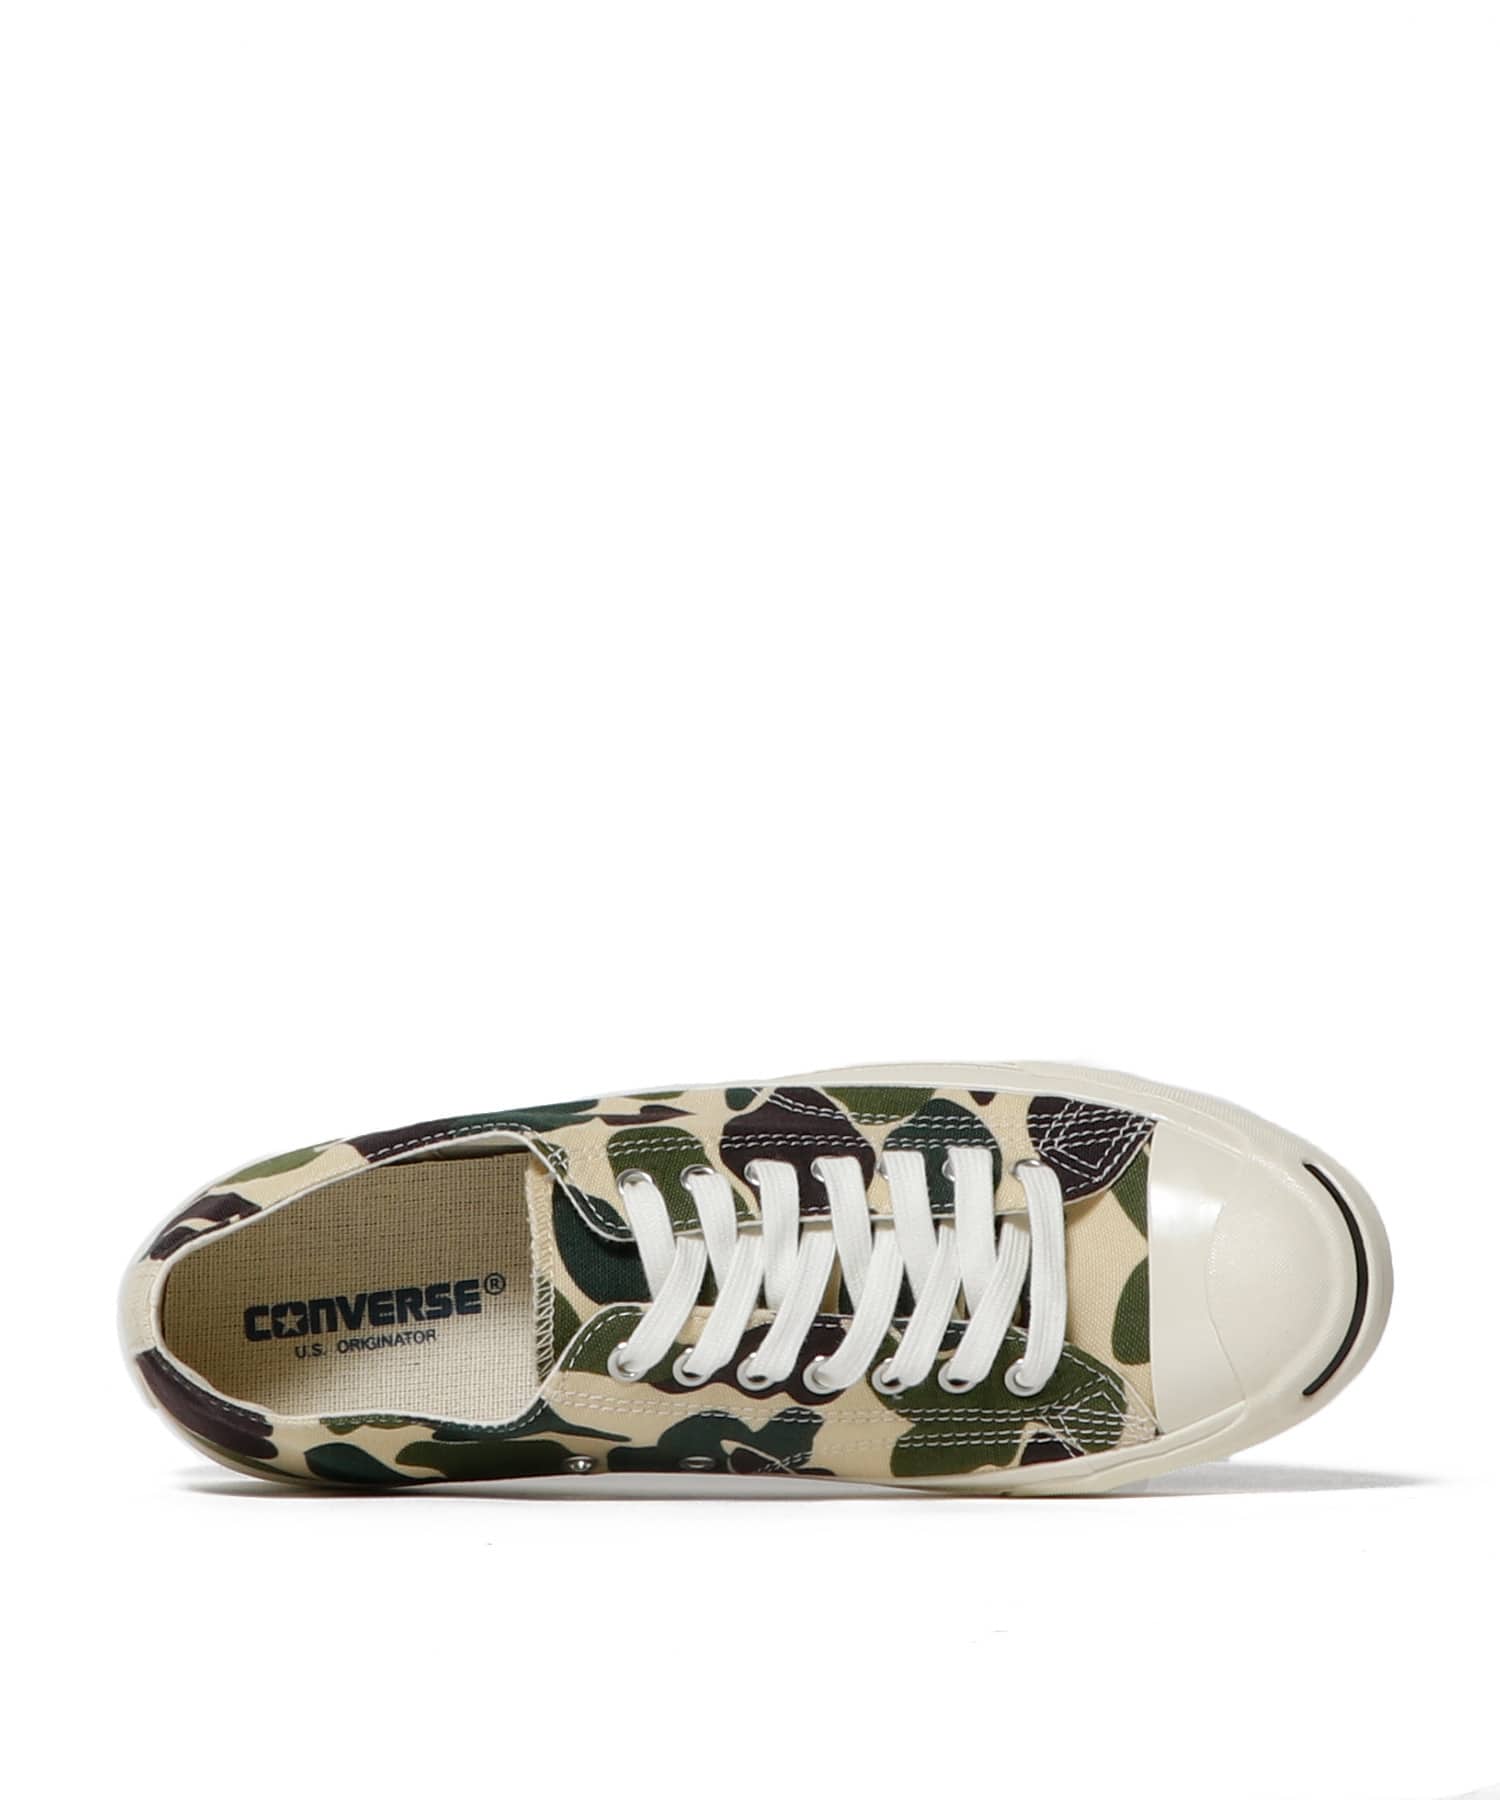 JACK PURCELL US 83CAMO 詳細画像 オリーブ 3